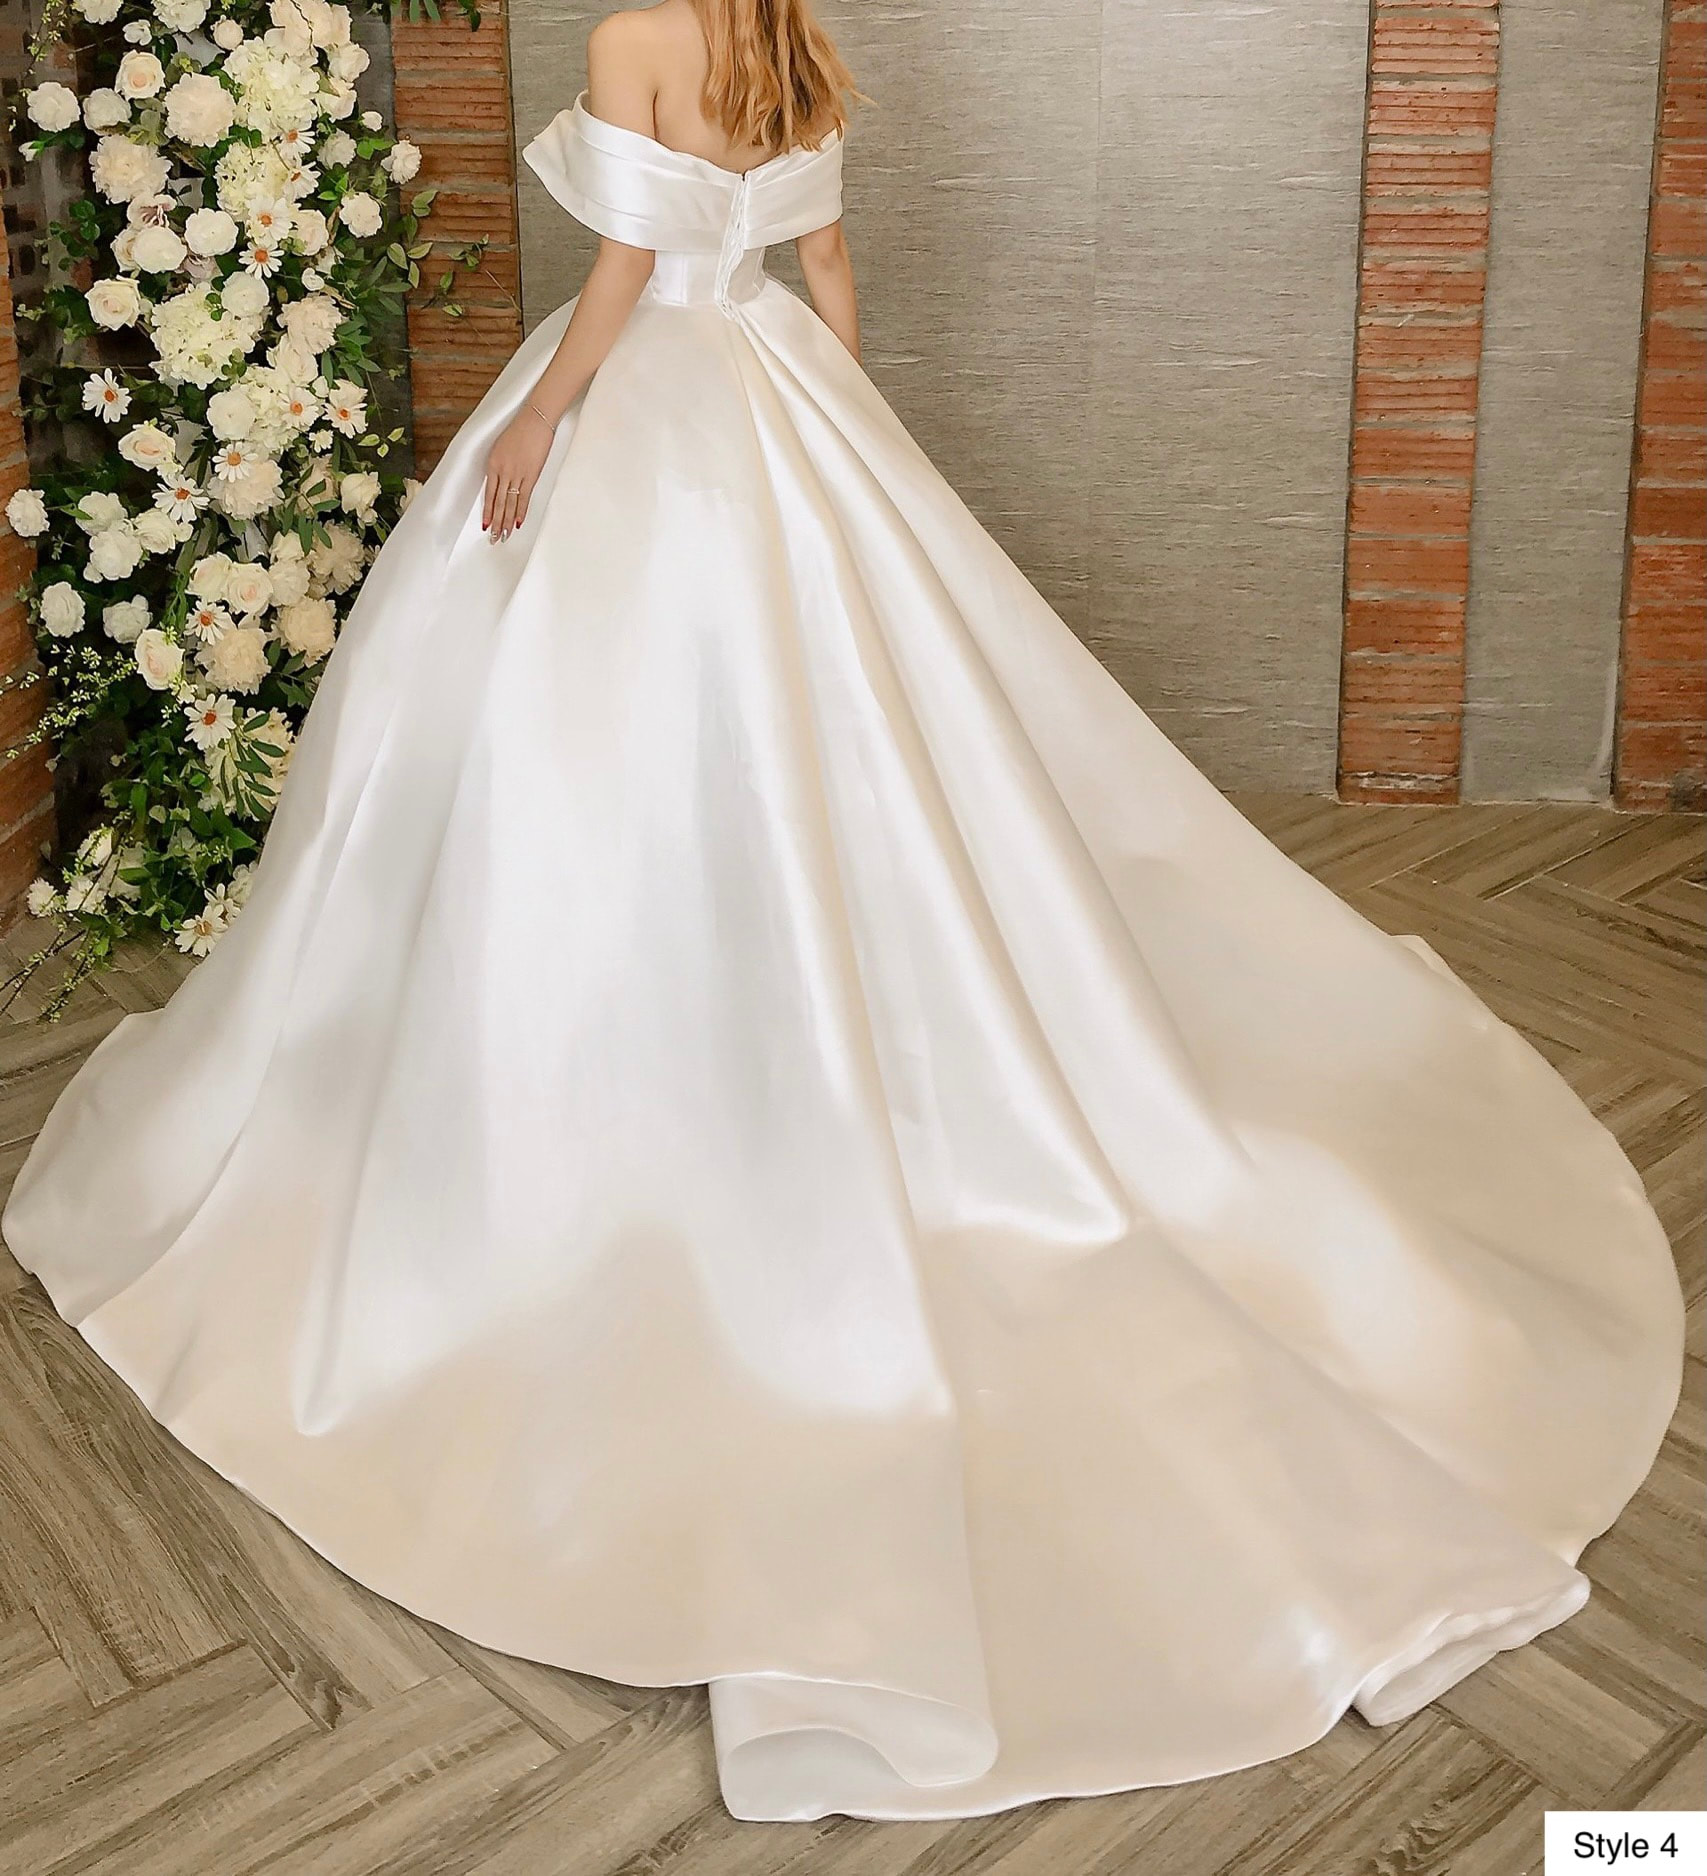 Off The Shoulder Elegant White Satin Ball Gown Wedding Dress With Train